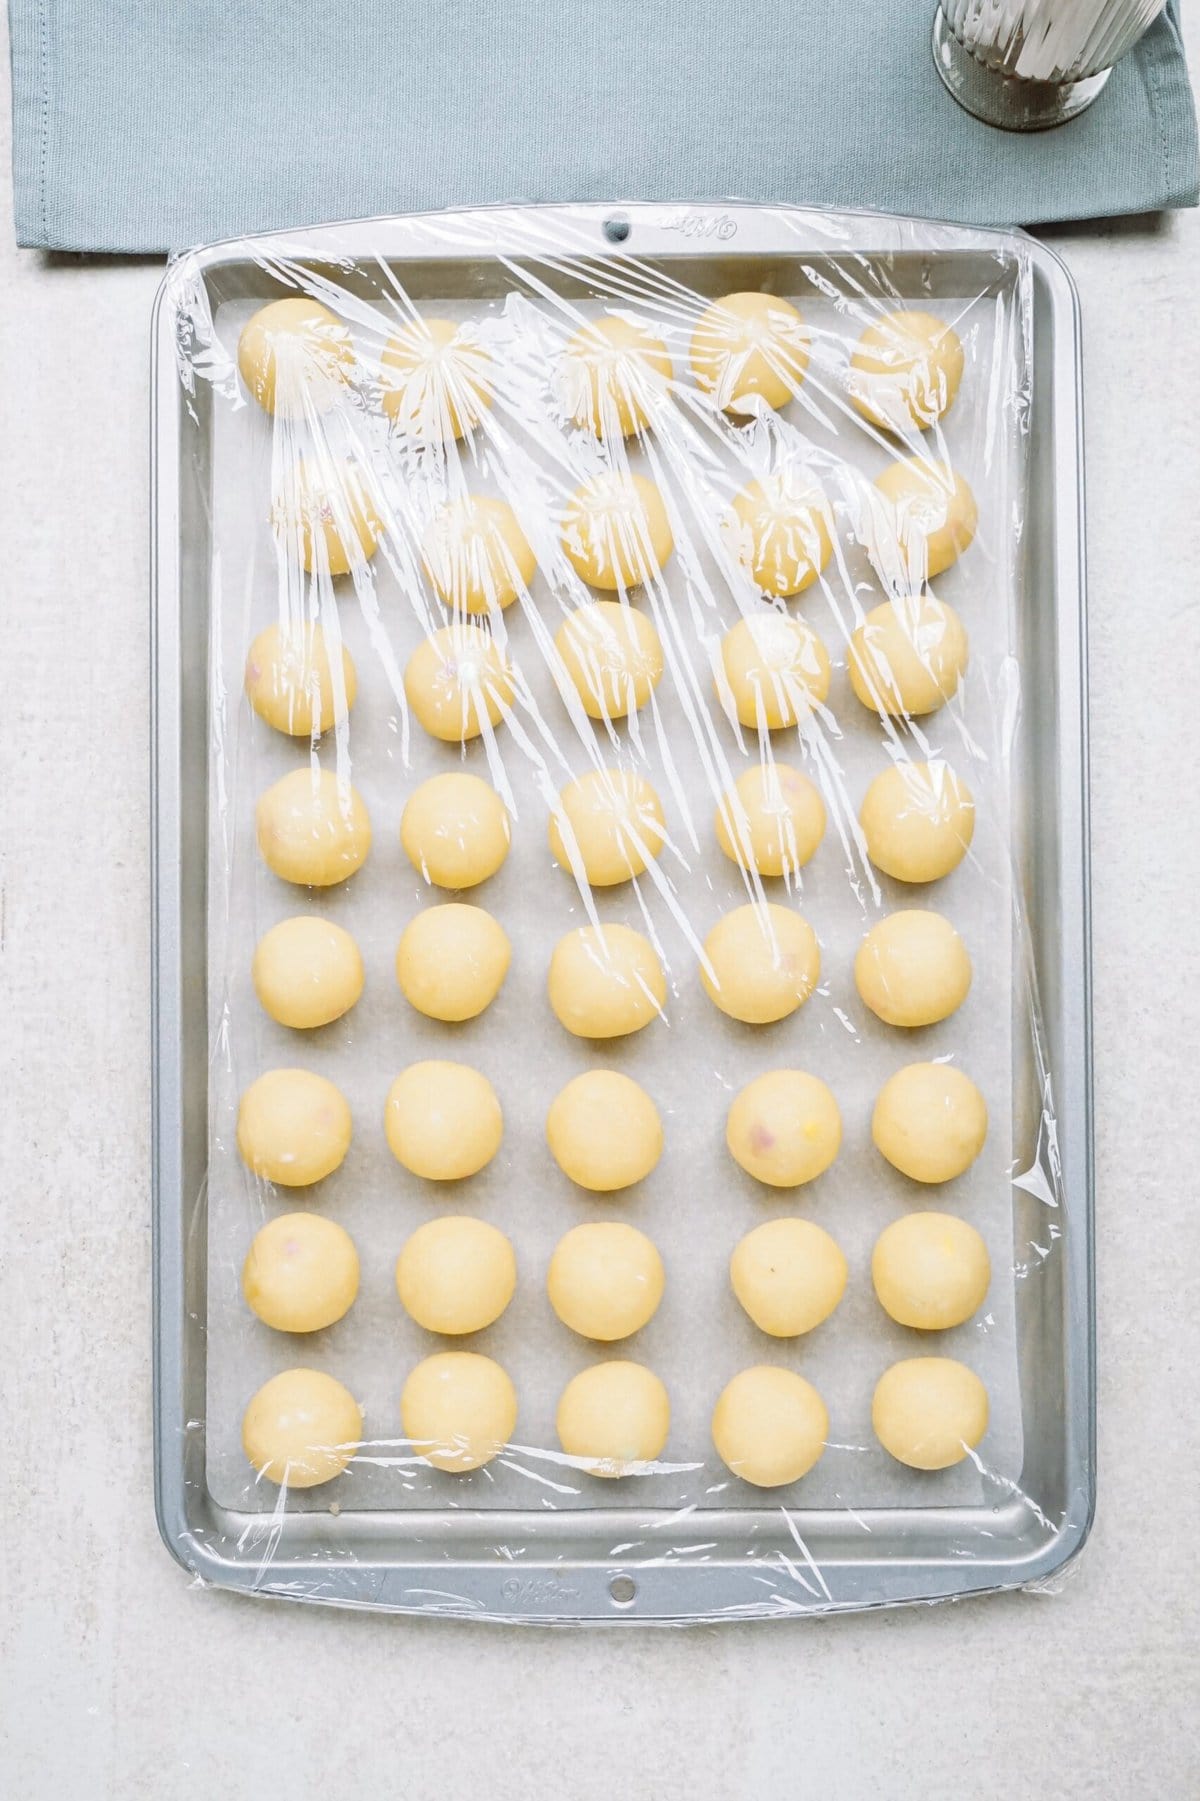 Rows of round cake balls on a tray, covered with plastic wrap.